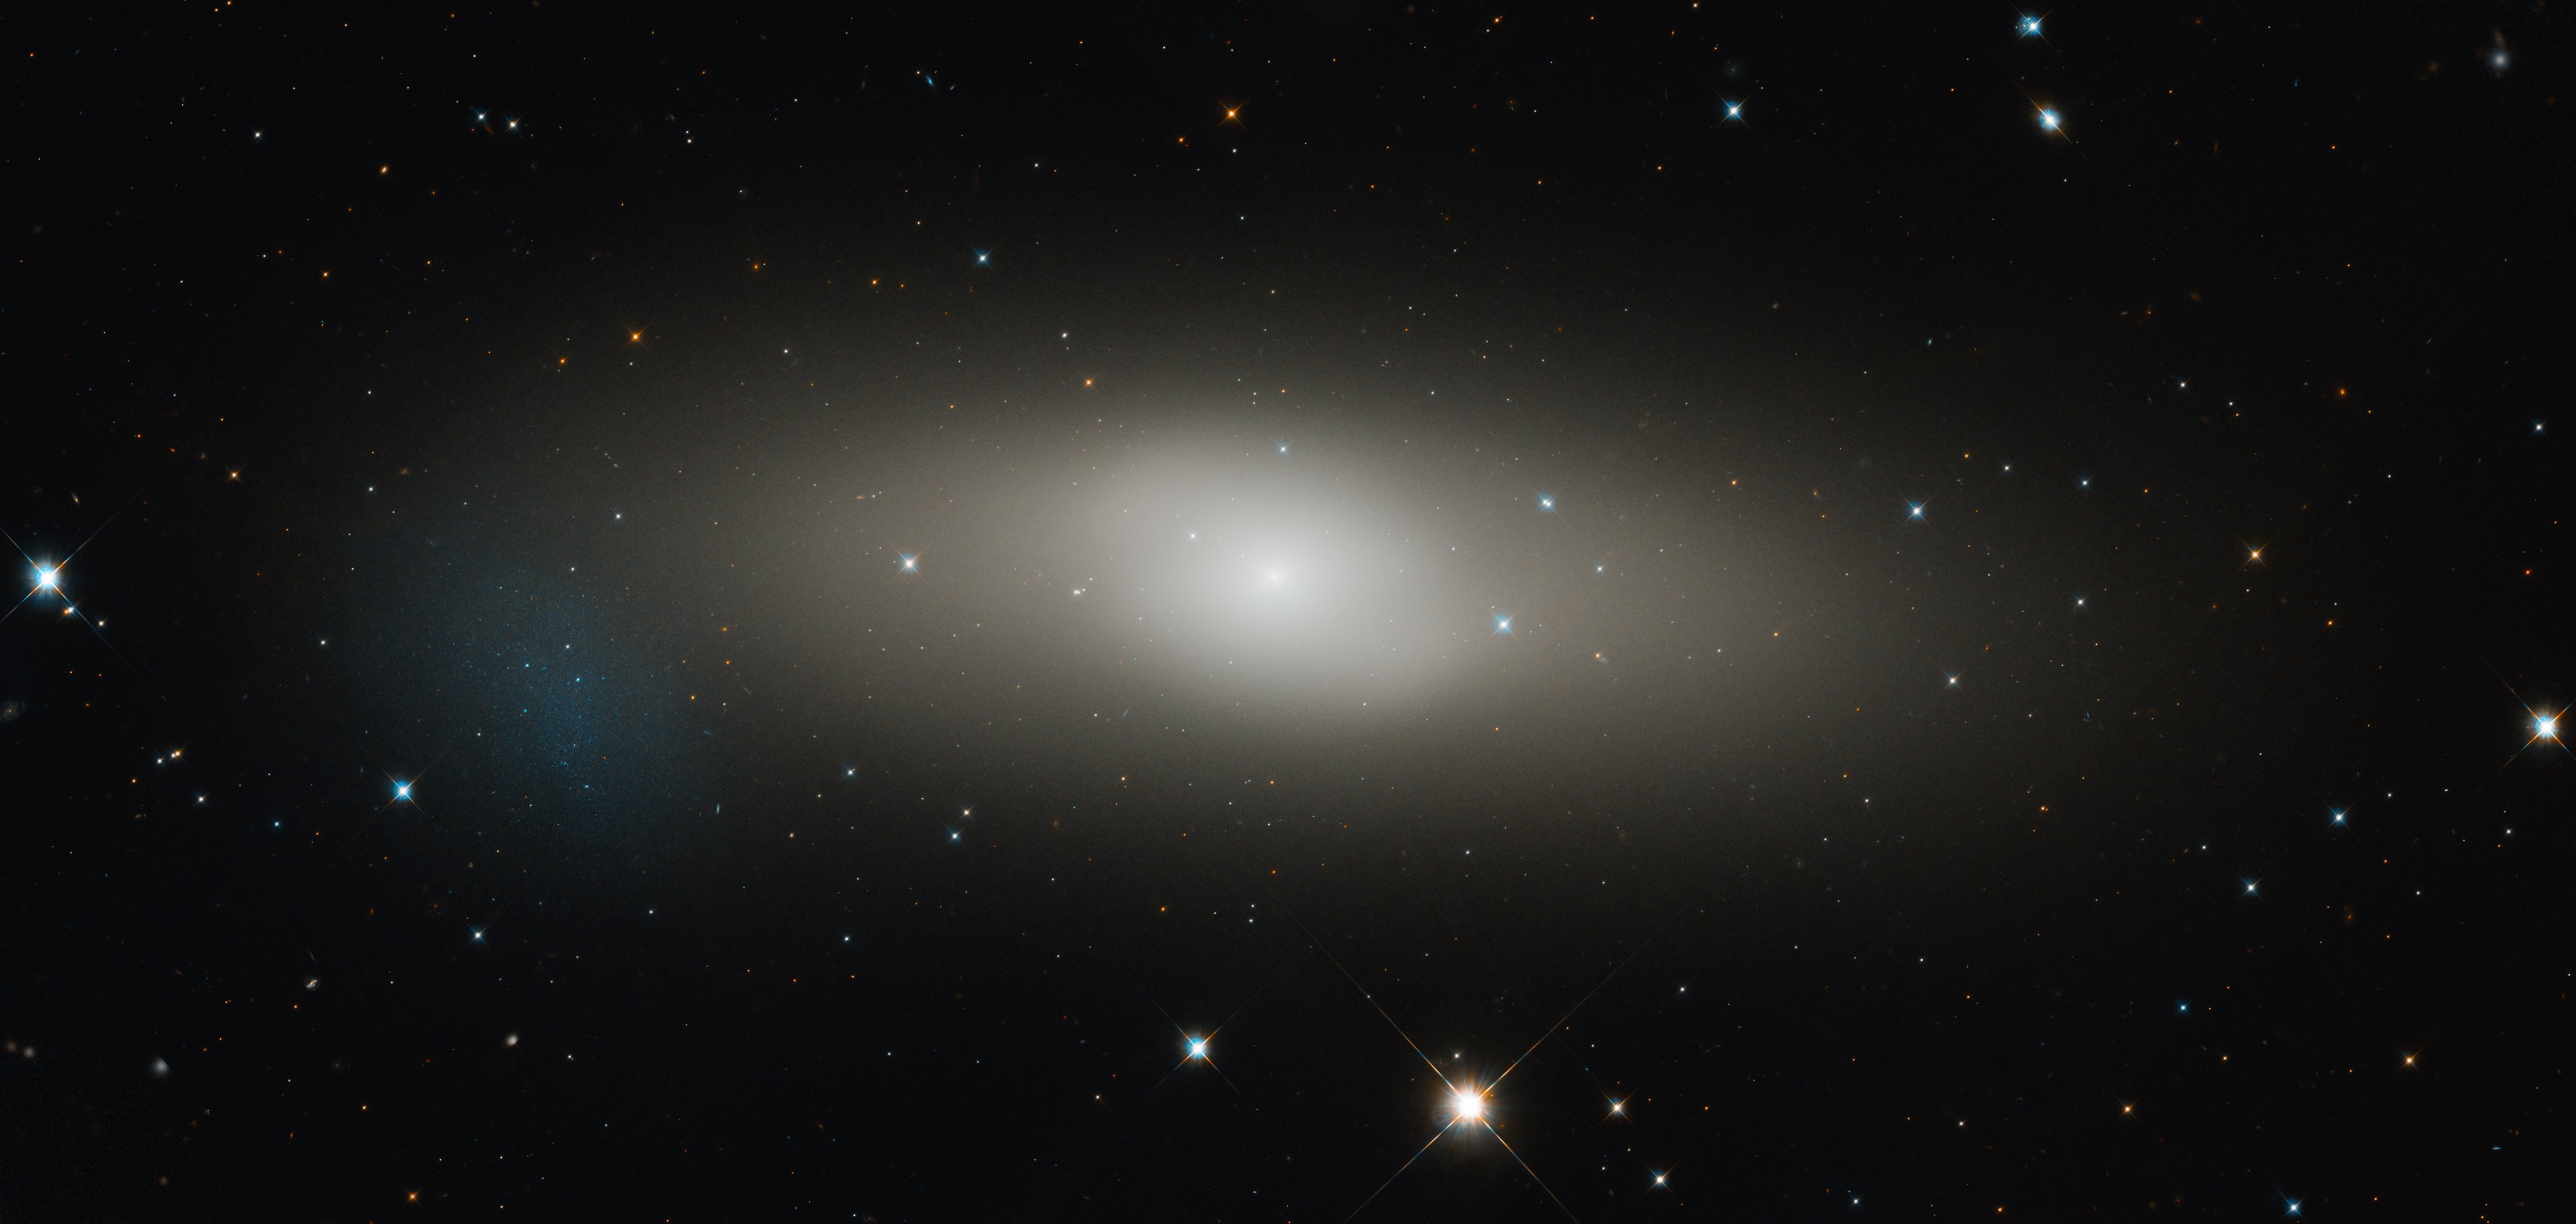 NASA telescope captures stunning image of nearby lens-shaped galaxy